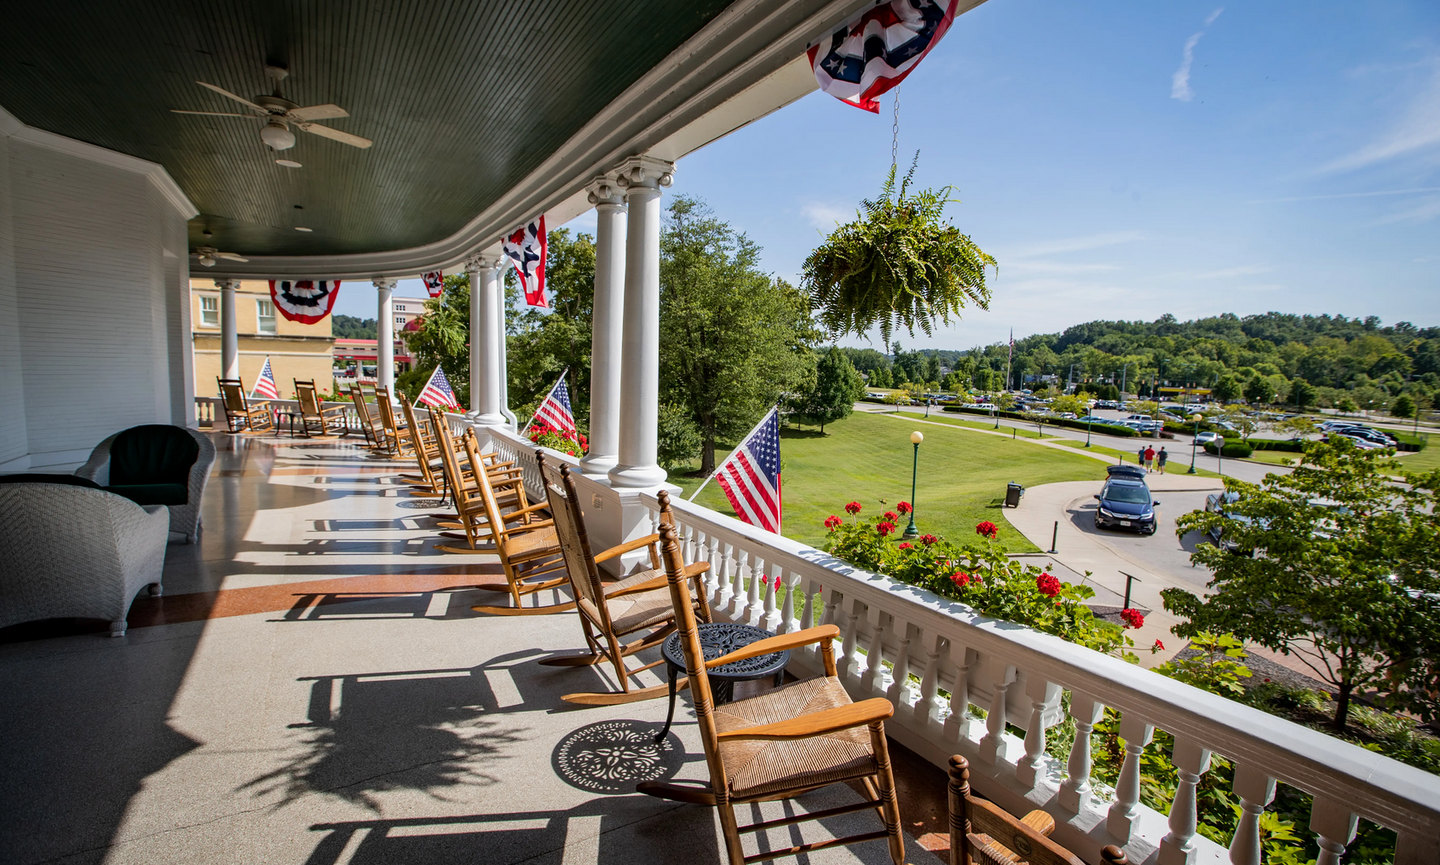 A porch overlooks the green landscaping of French Lick Resort